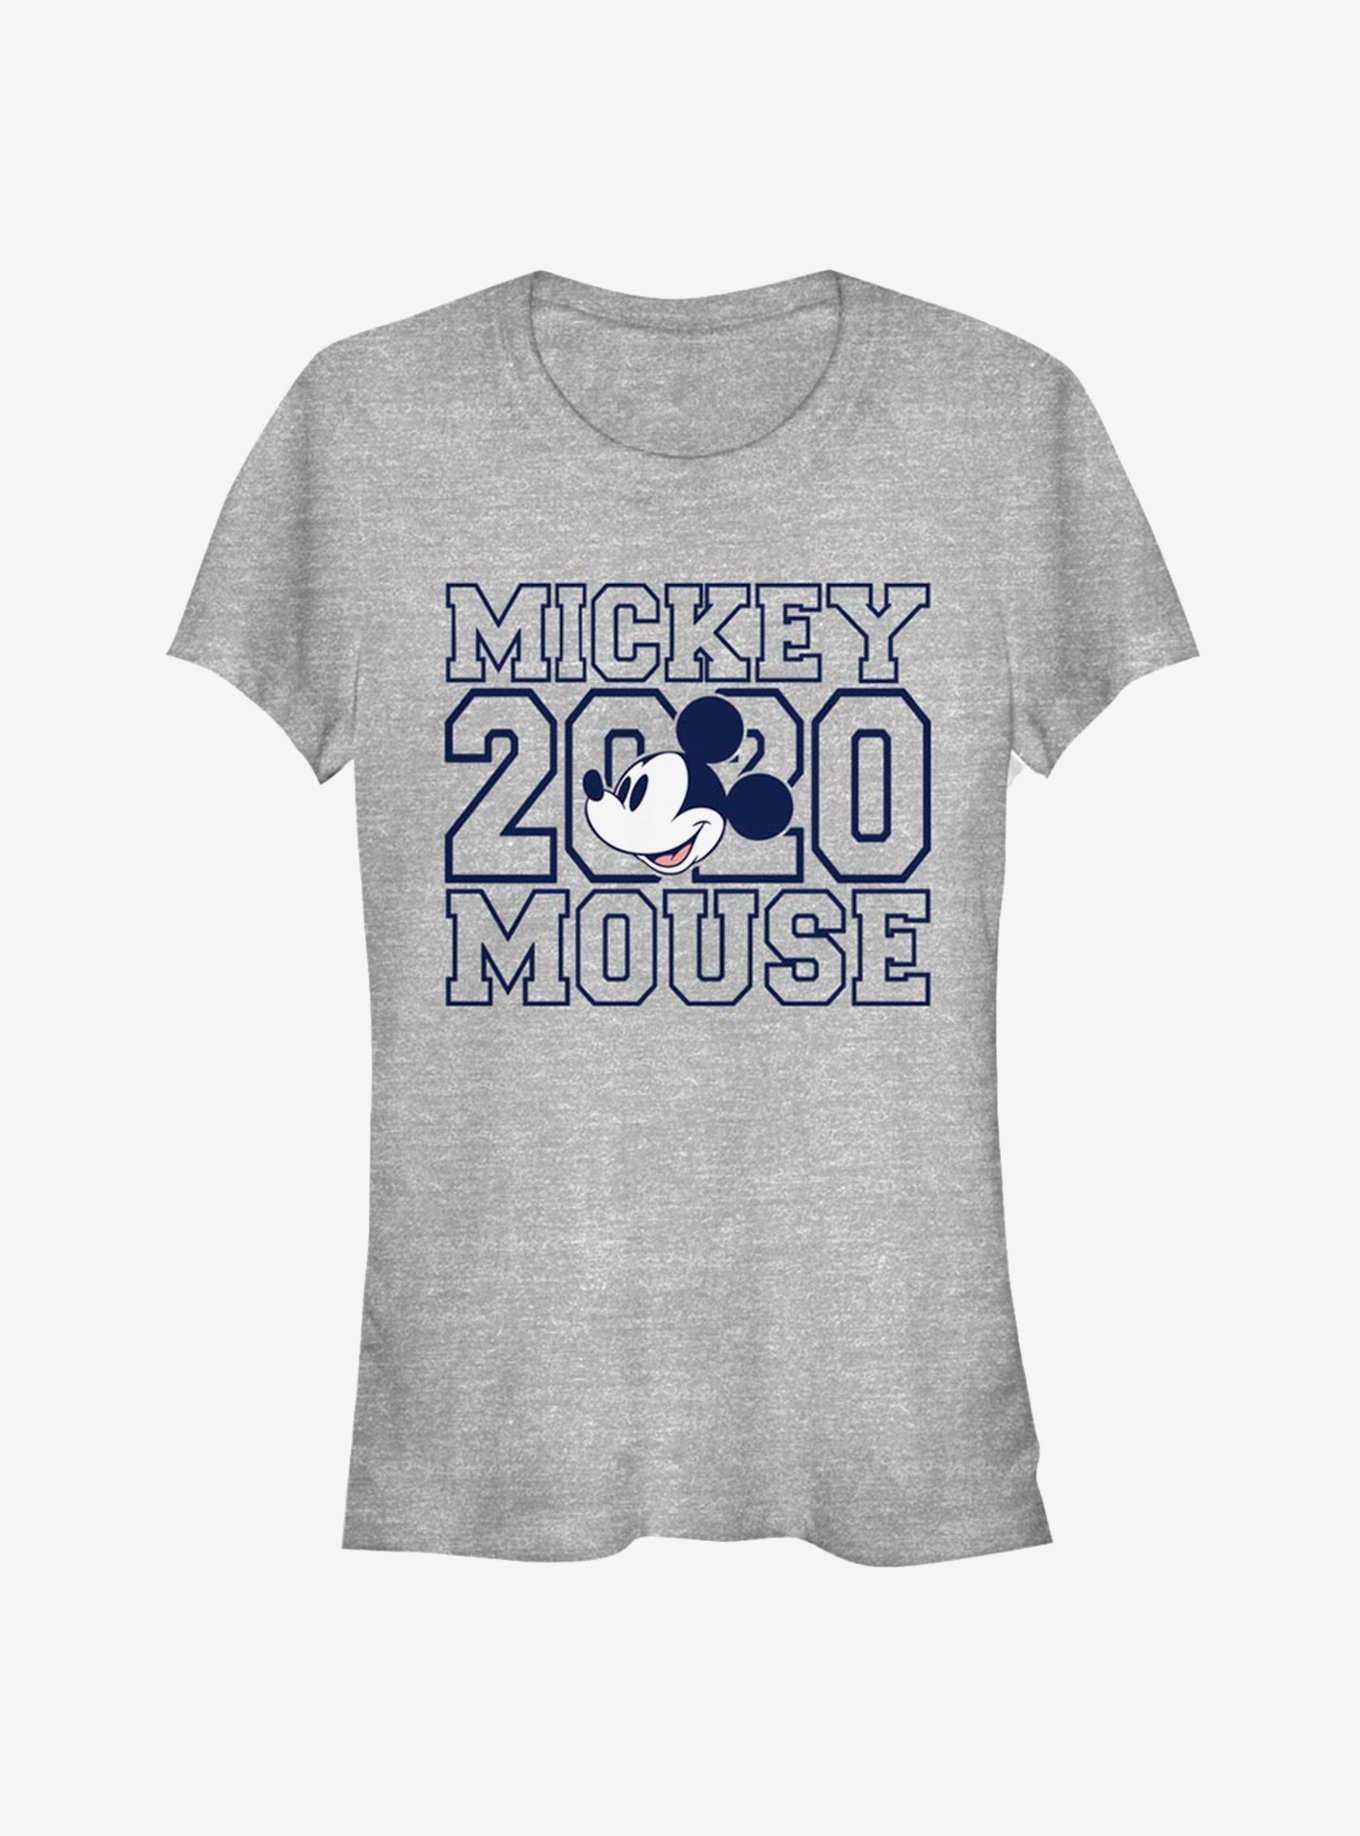 Disney Mickey Mouse 2020 Mouse Classic Girls T-Shirt, , hi-res